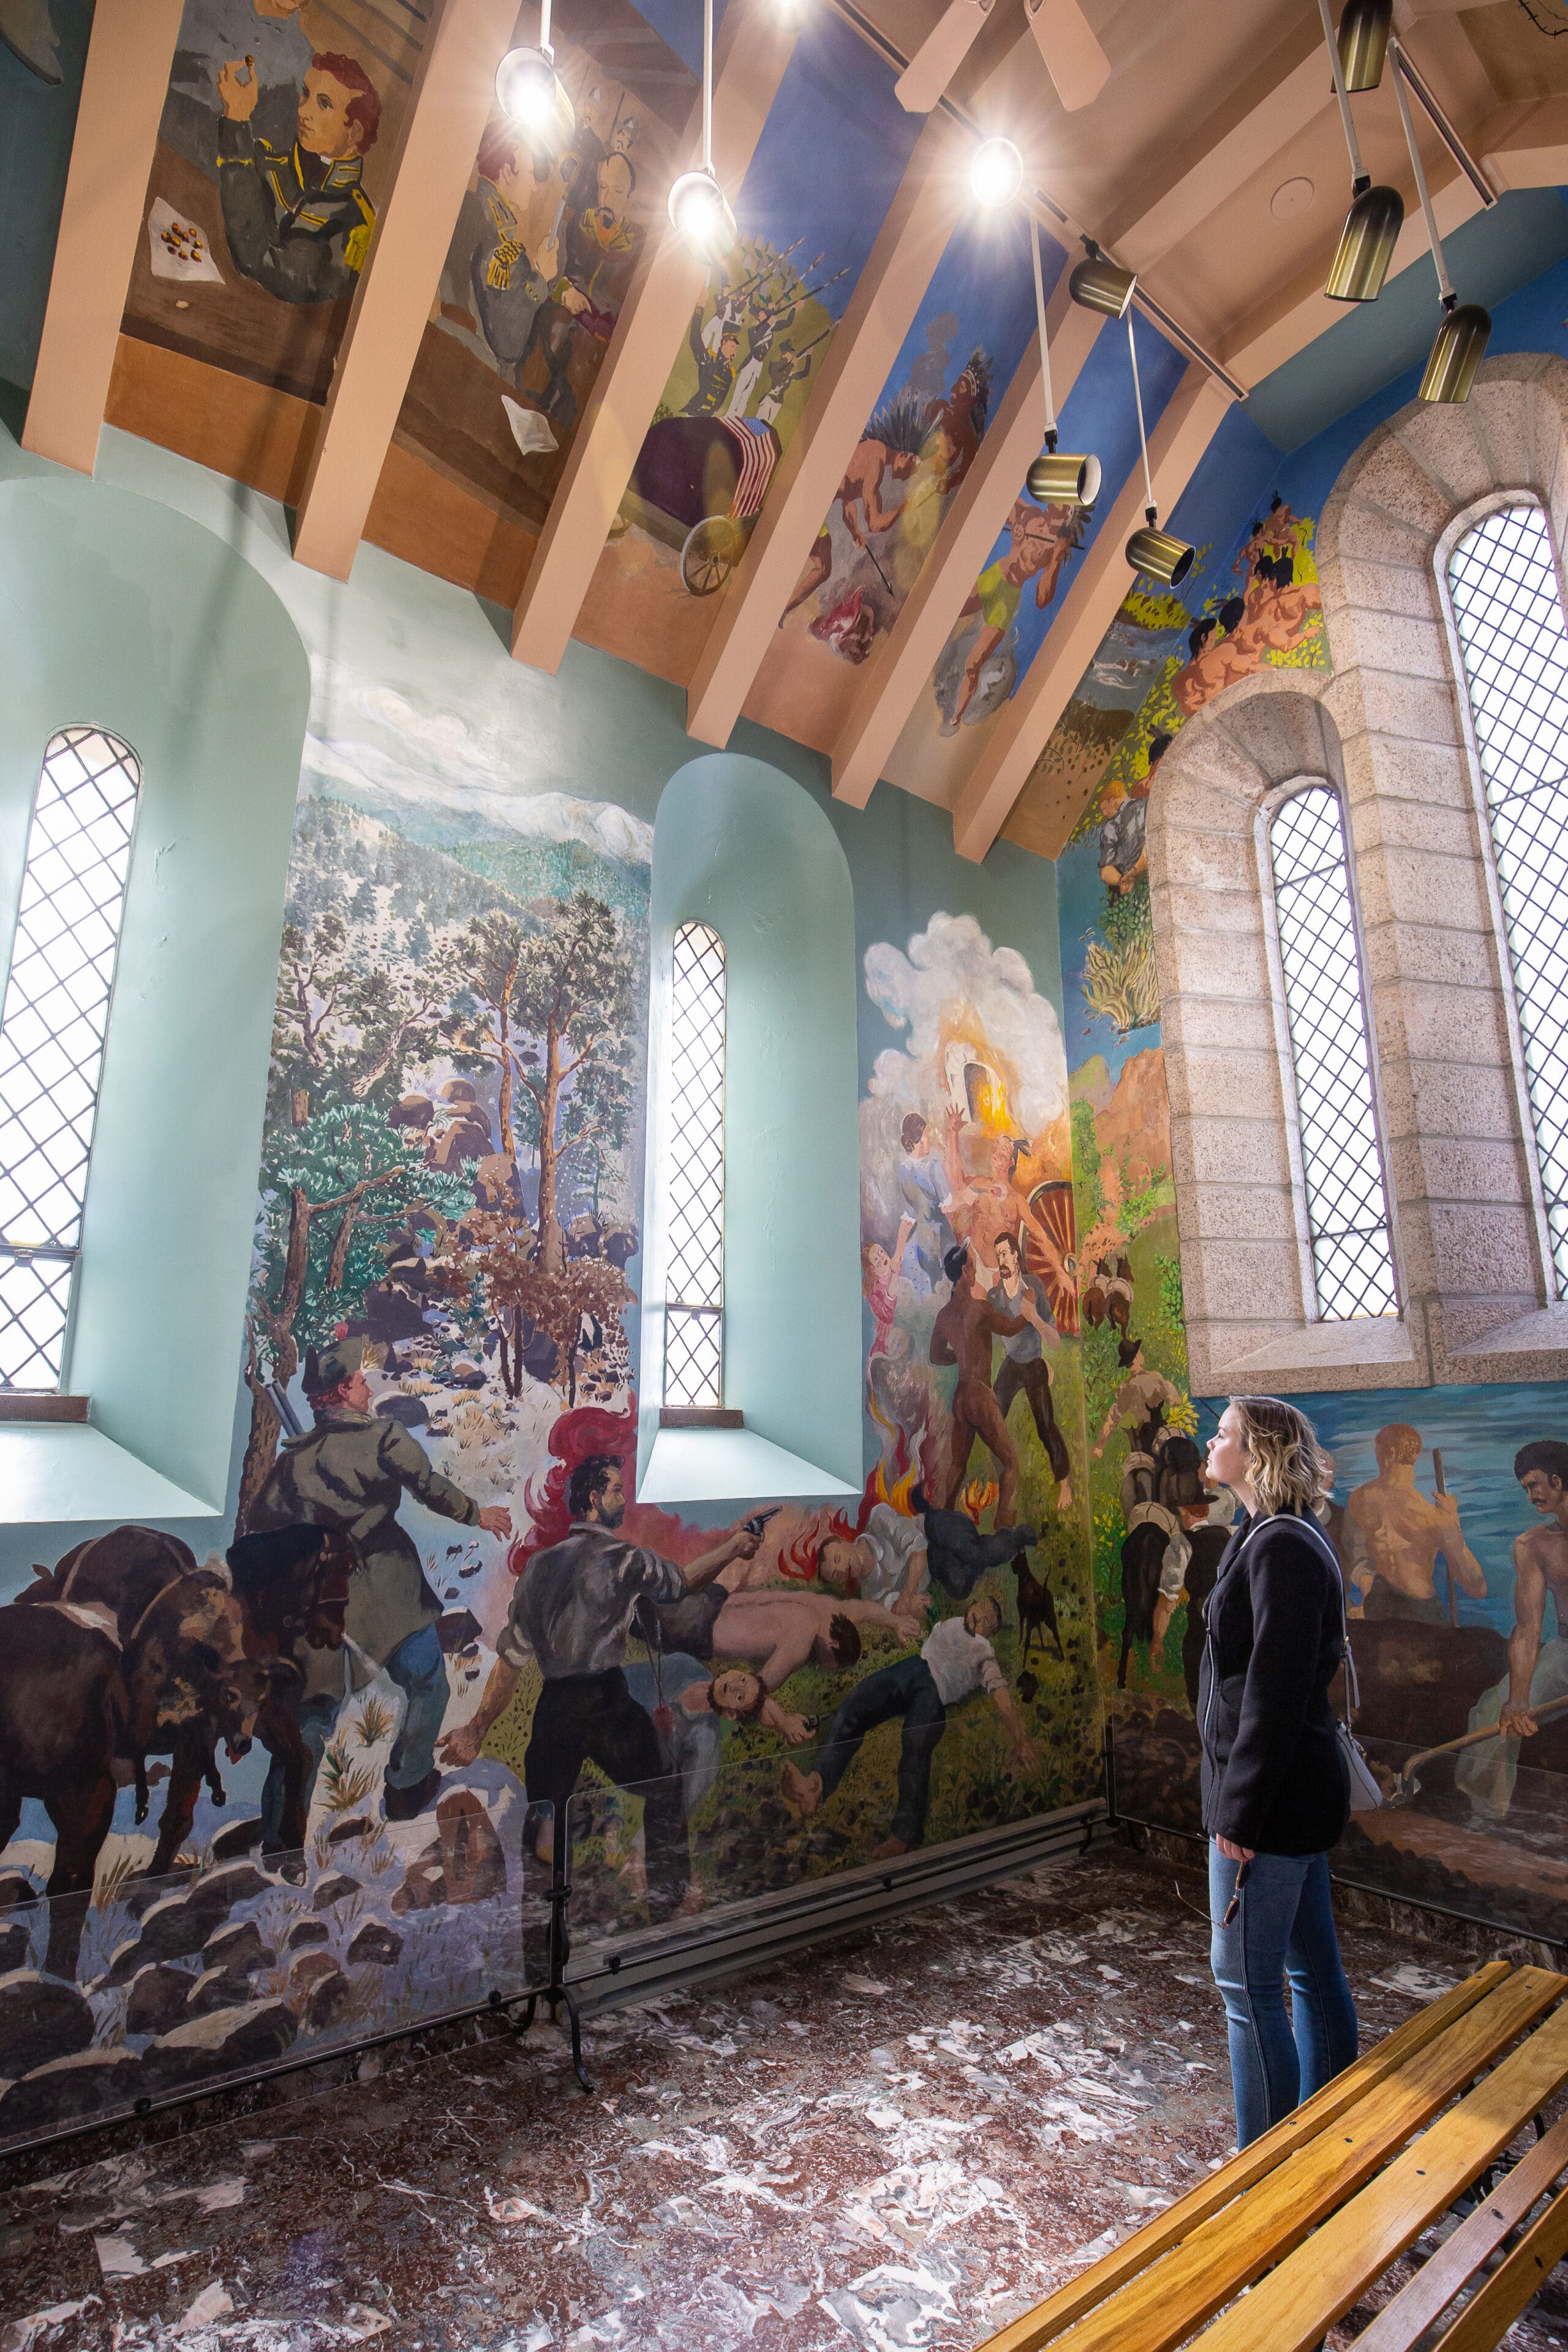 The historic Randall Davey mural depicts local history.